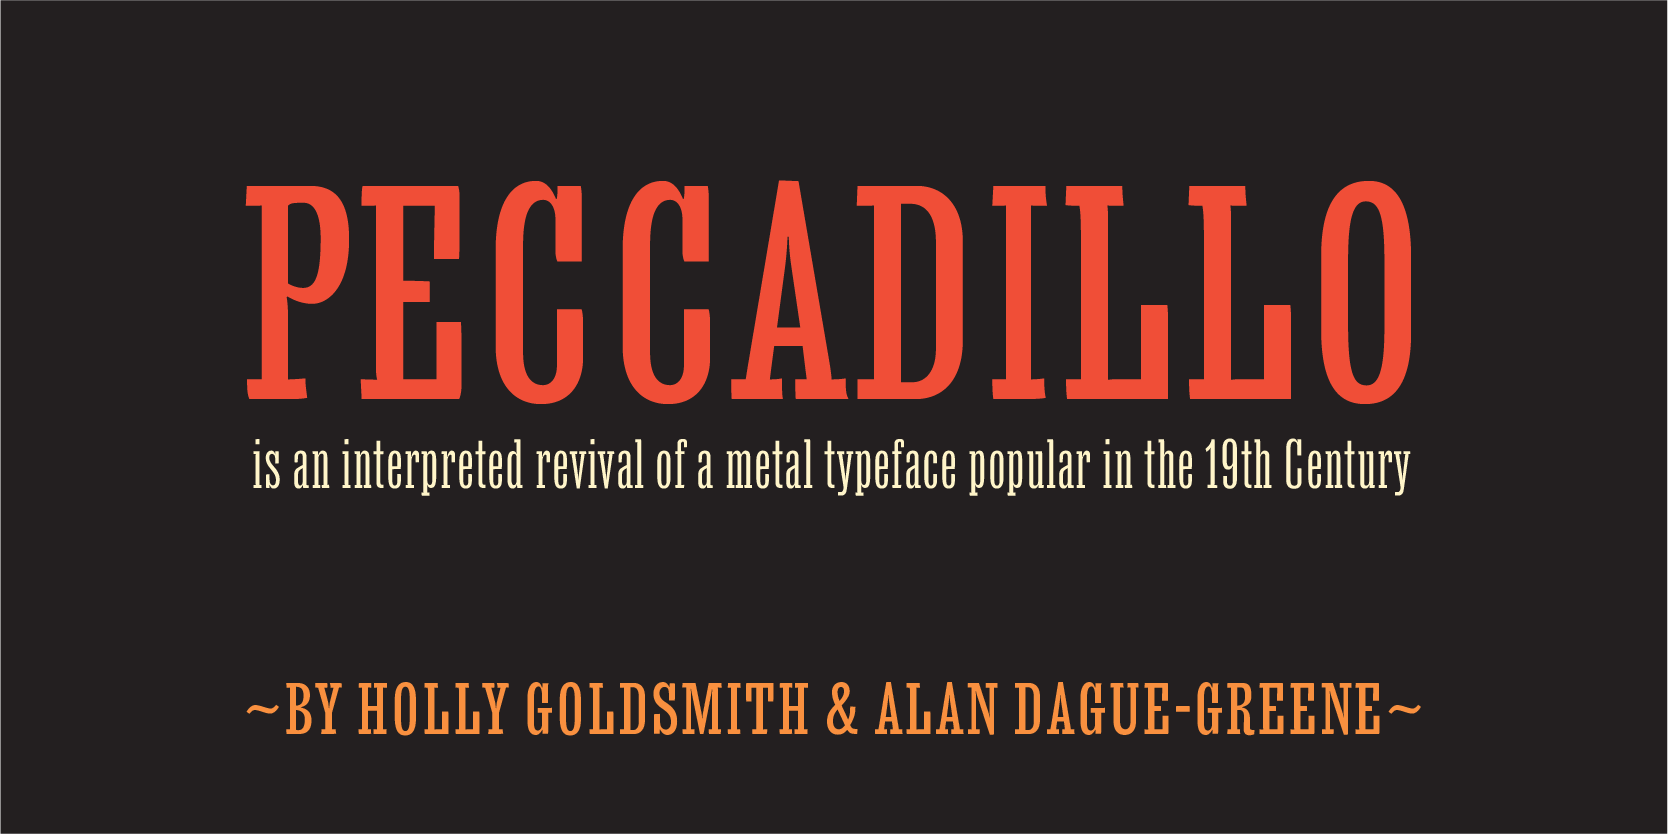 Card displaying MVB Peccadillo typeface in various styles